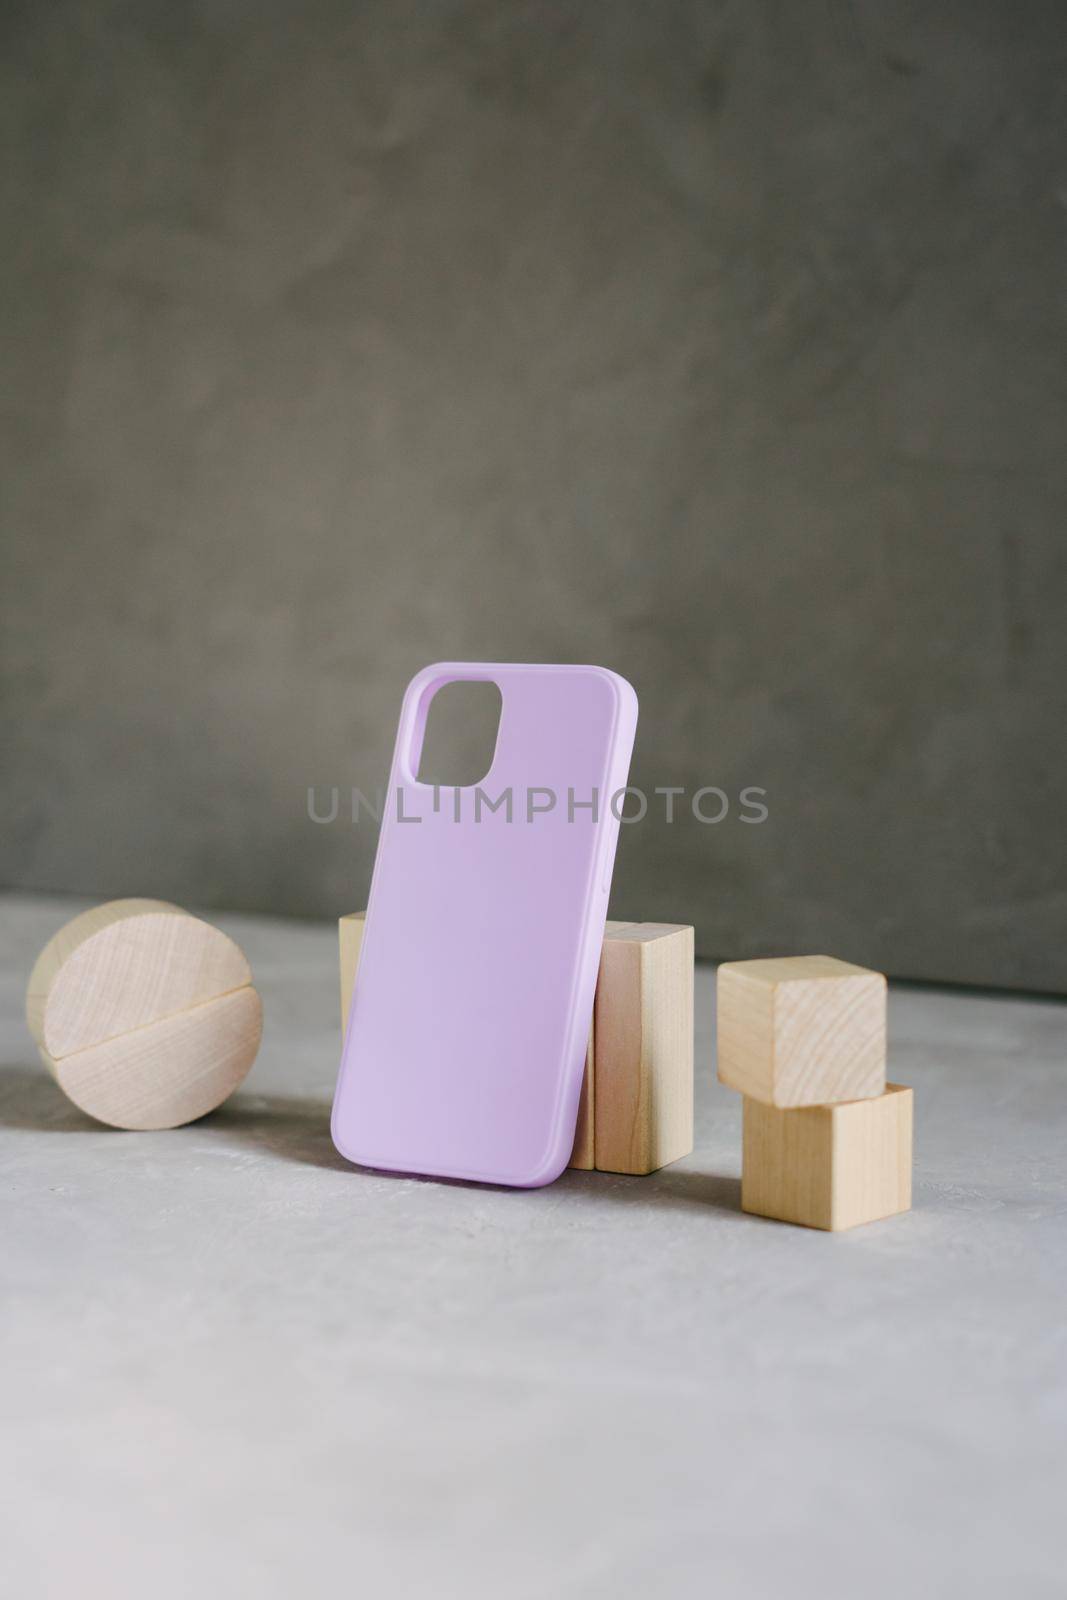 Protective silicone case for smartphone. Wooden cubes. by Rodnova